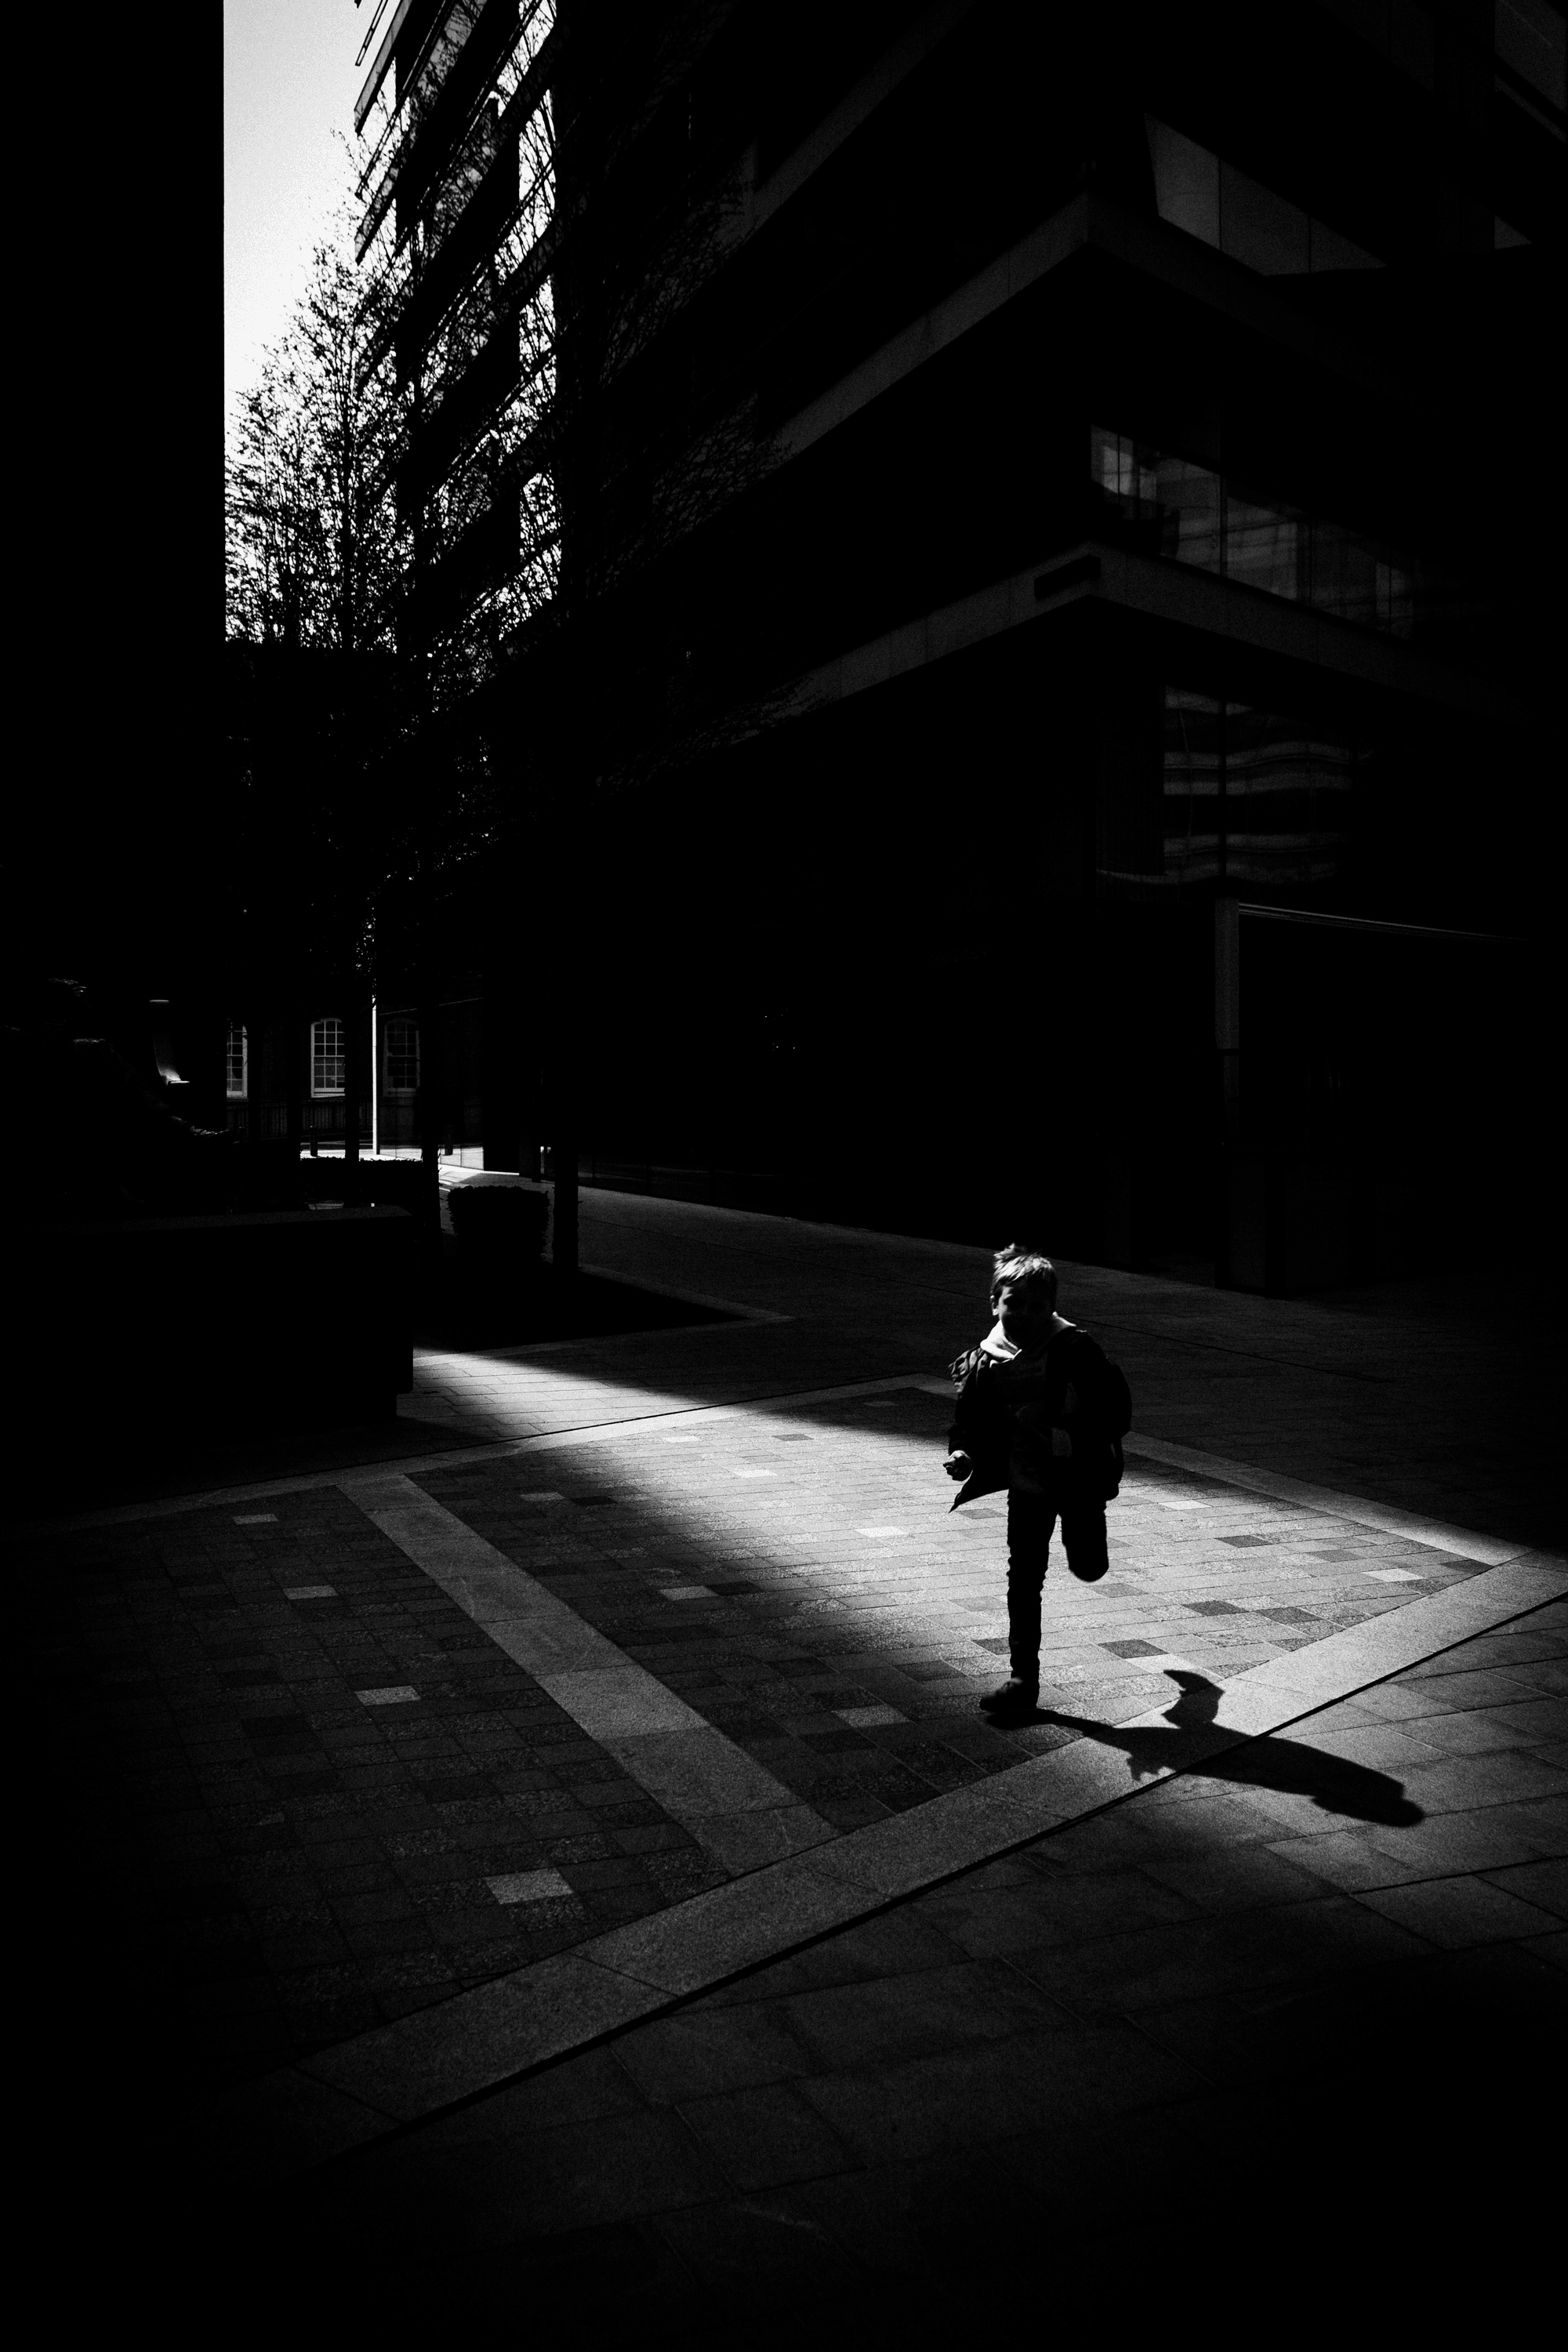 The Boy In The Shadows